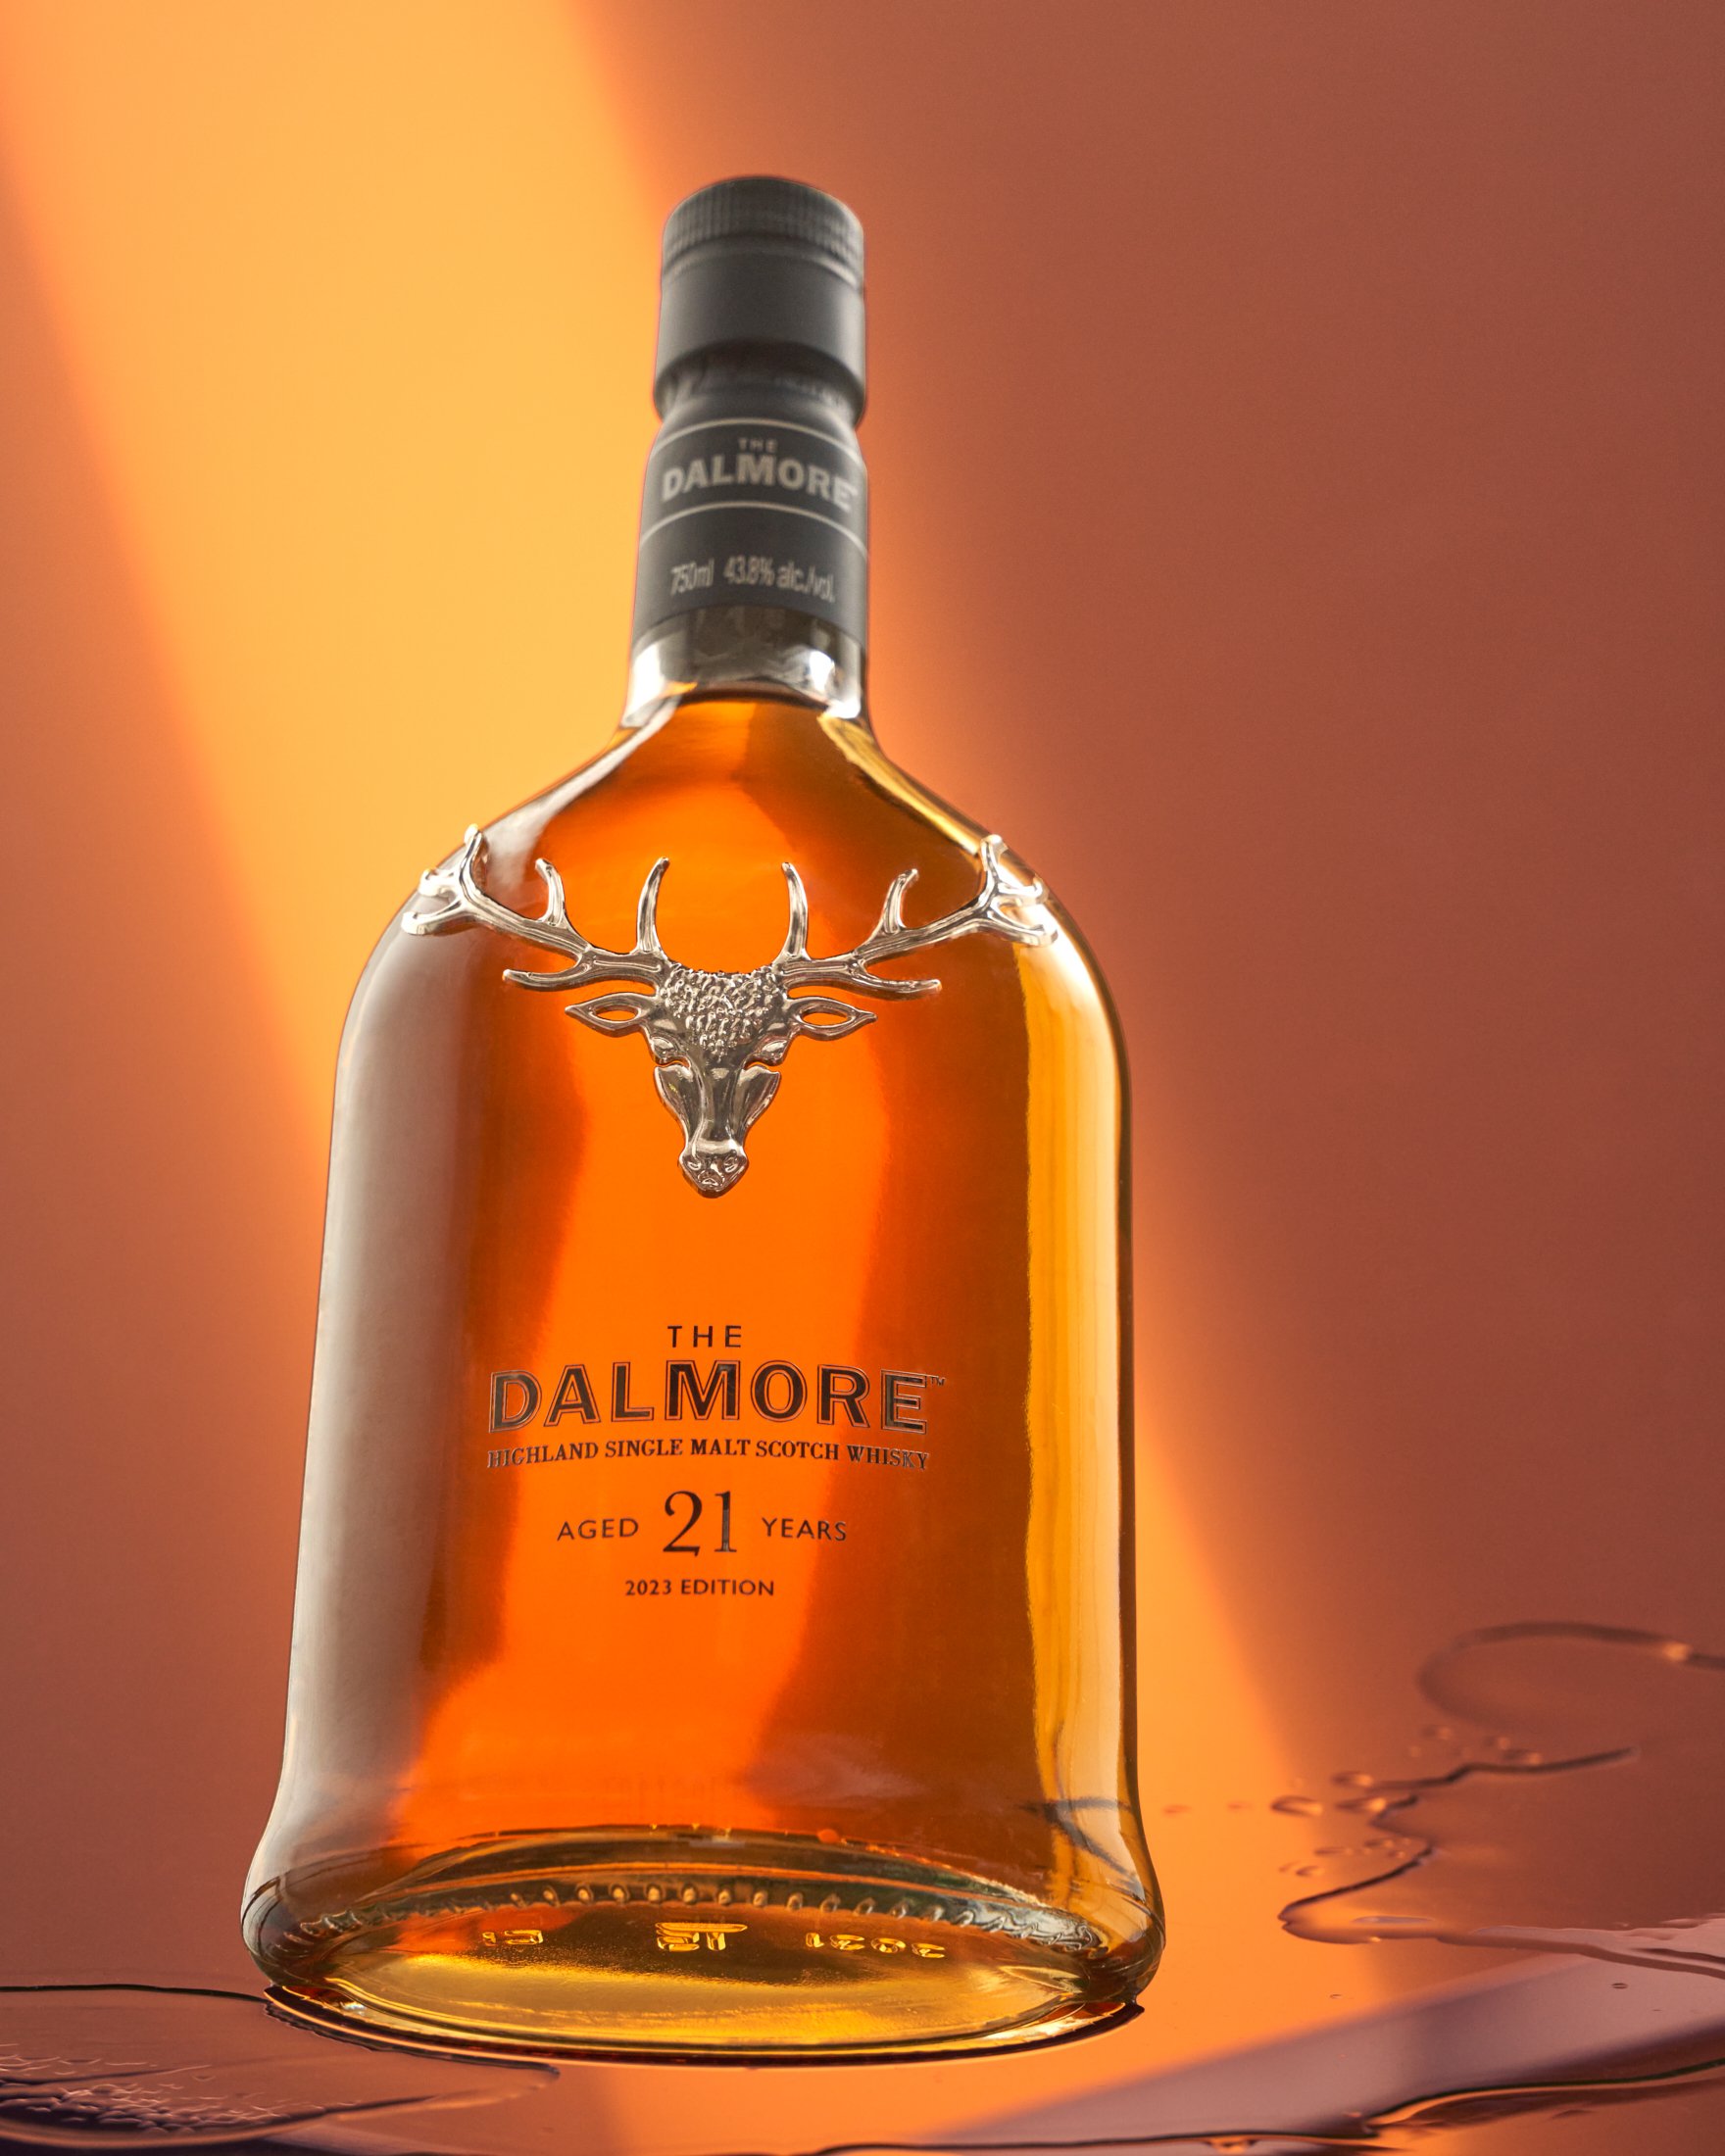 20230321_TheDalmore23gifting0112_updated_cropped.jpg